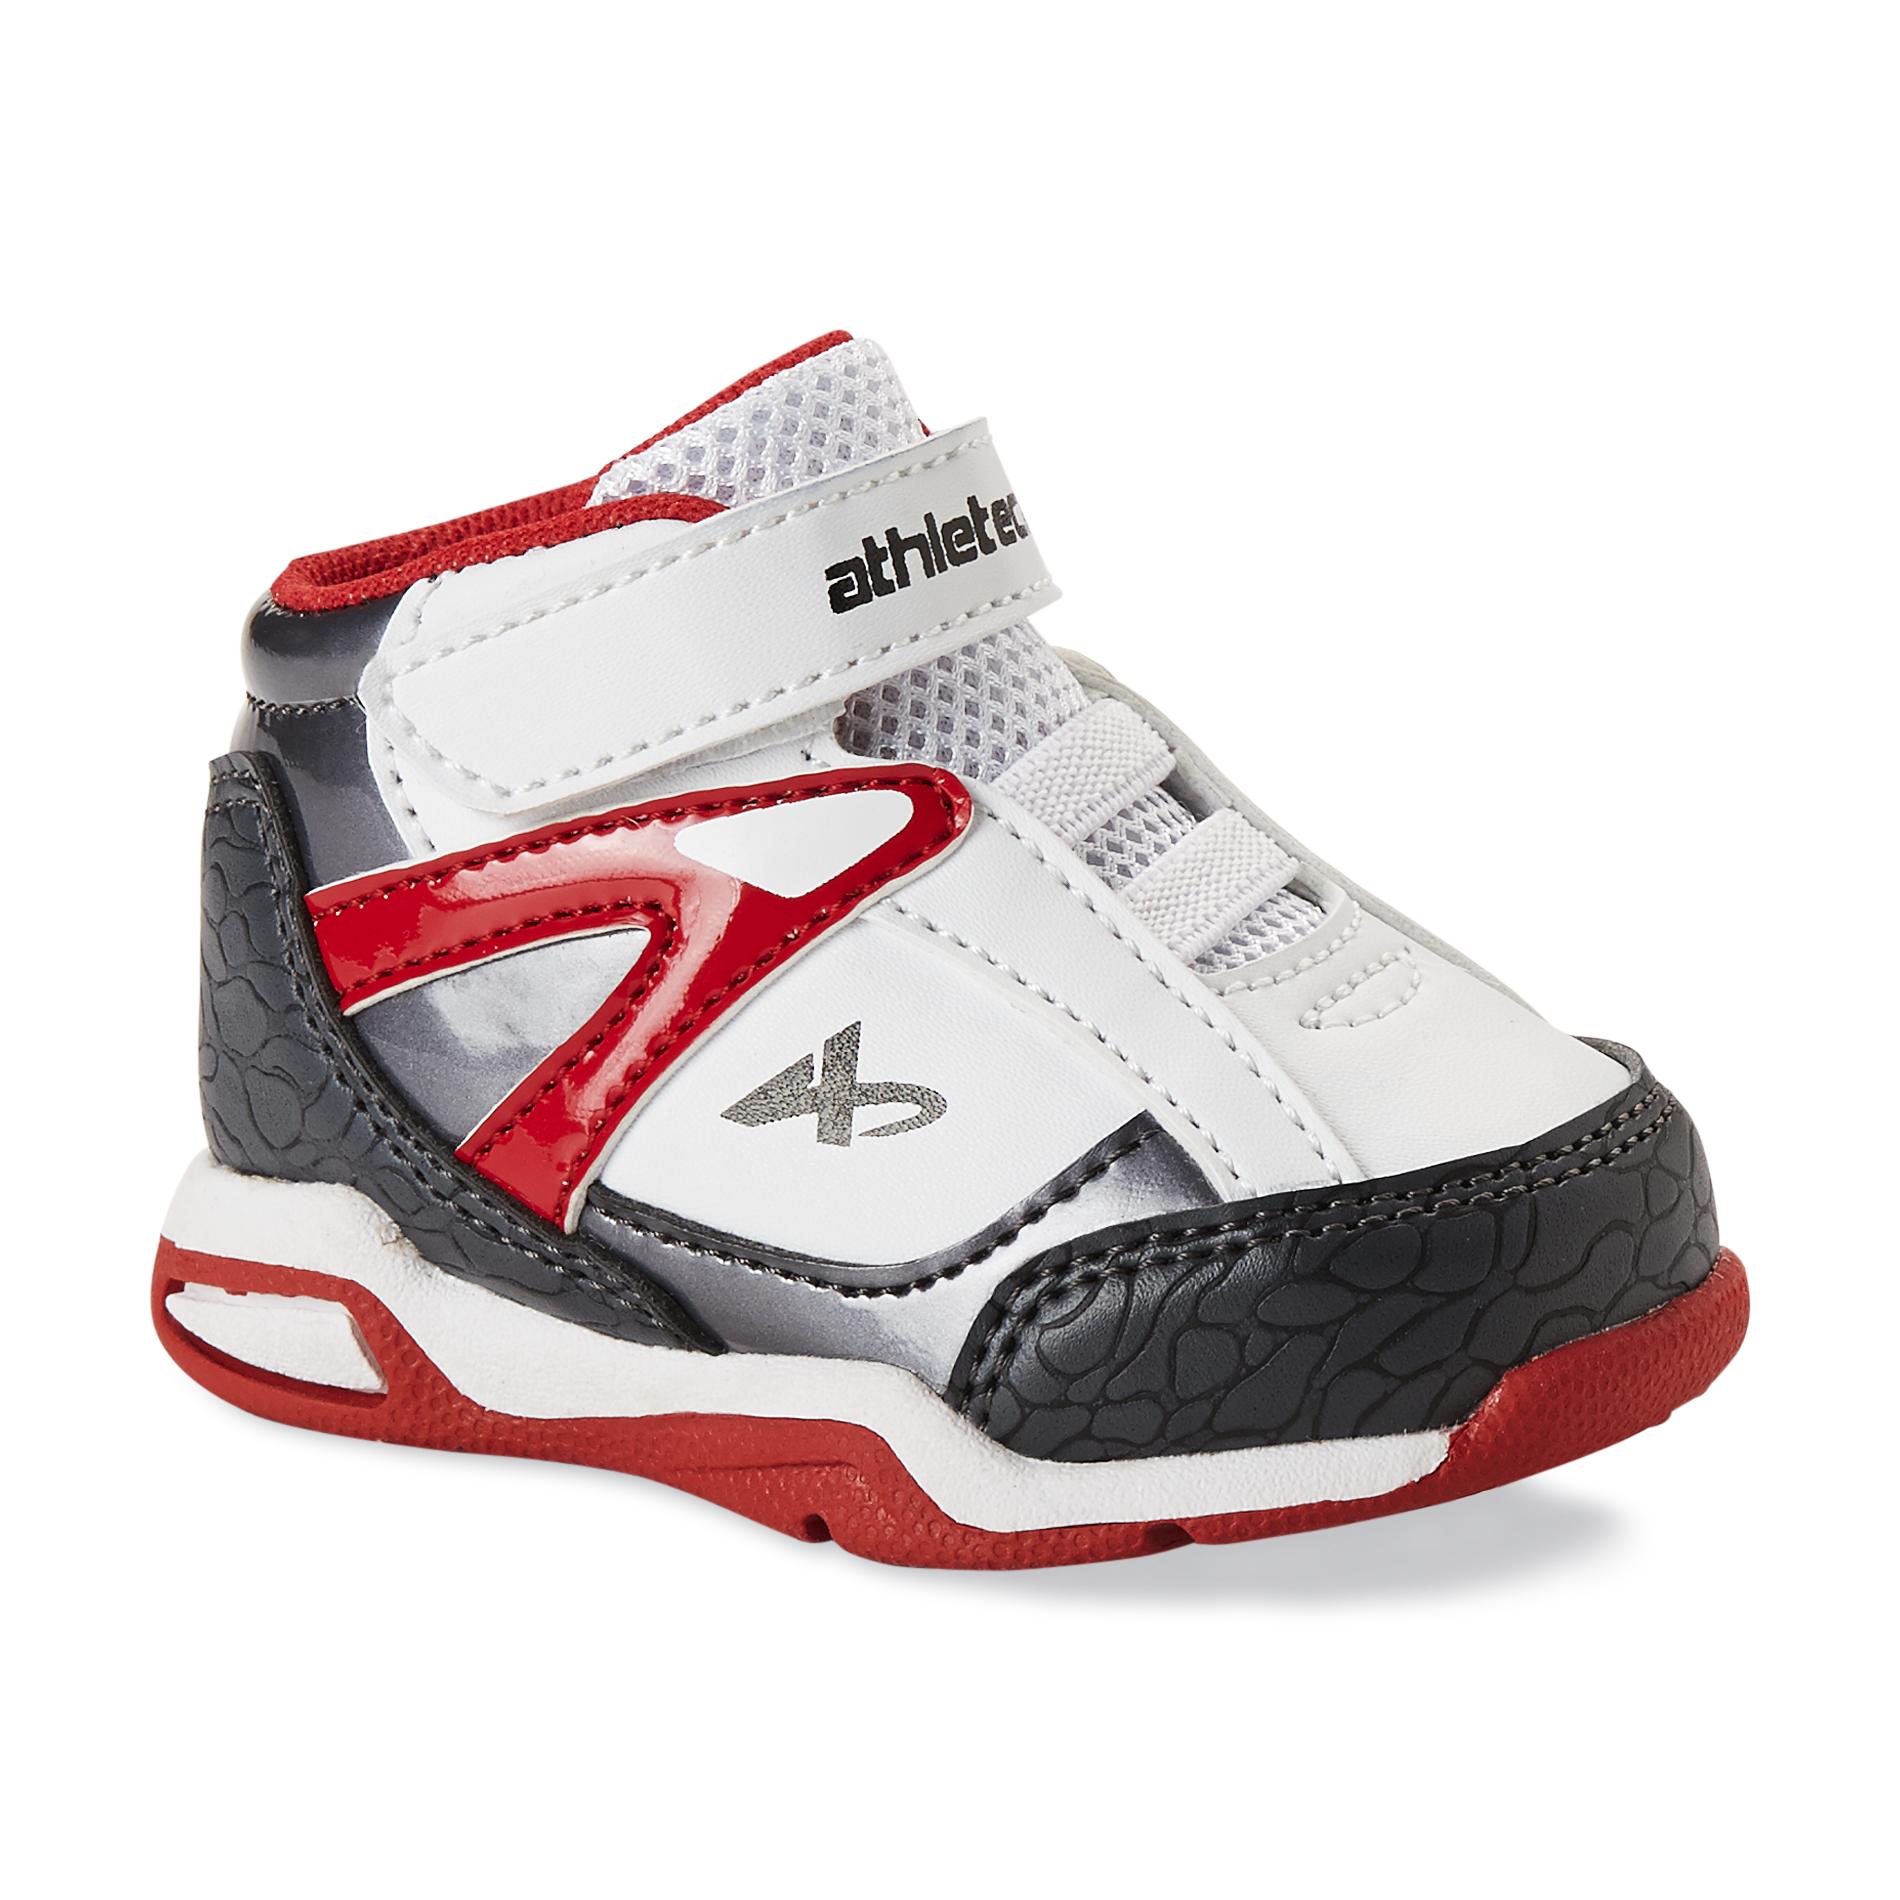 Toddler Boy's Terminator White/Gray/Red Athletic Shoe